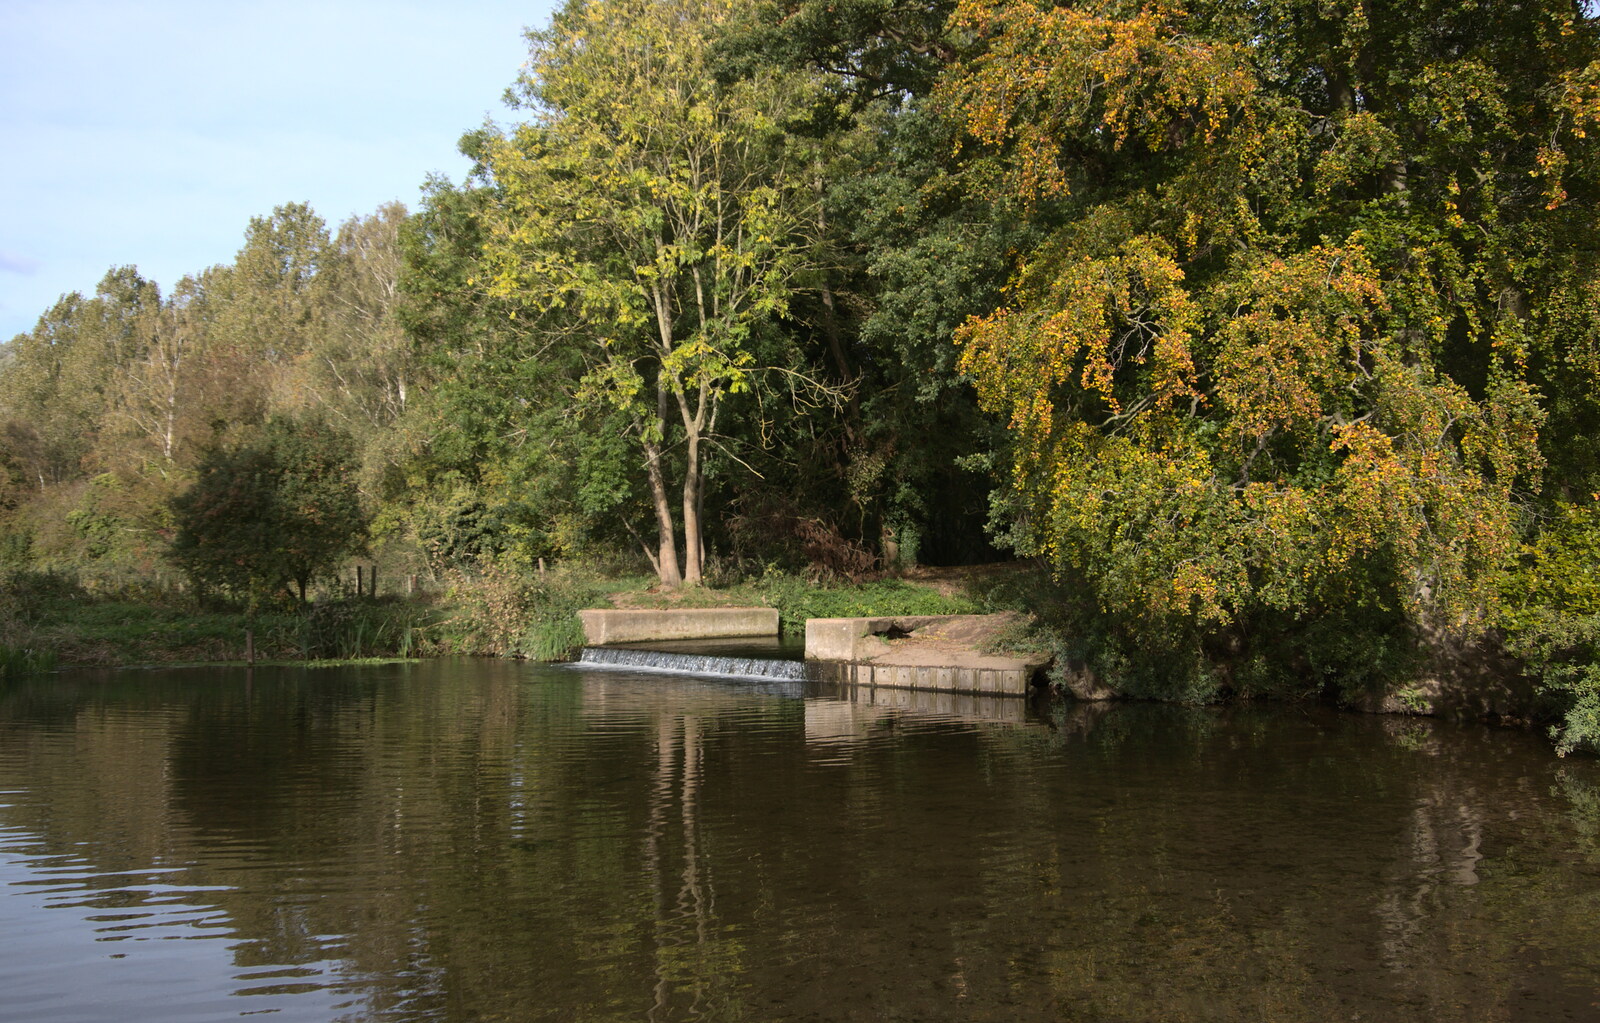 The weir and pond at Knettishall from Evidence of Autumn: Geocaching on Knettishall Heath, Suffolk - 7th October 2018